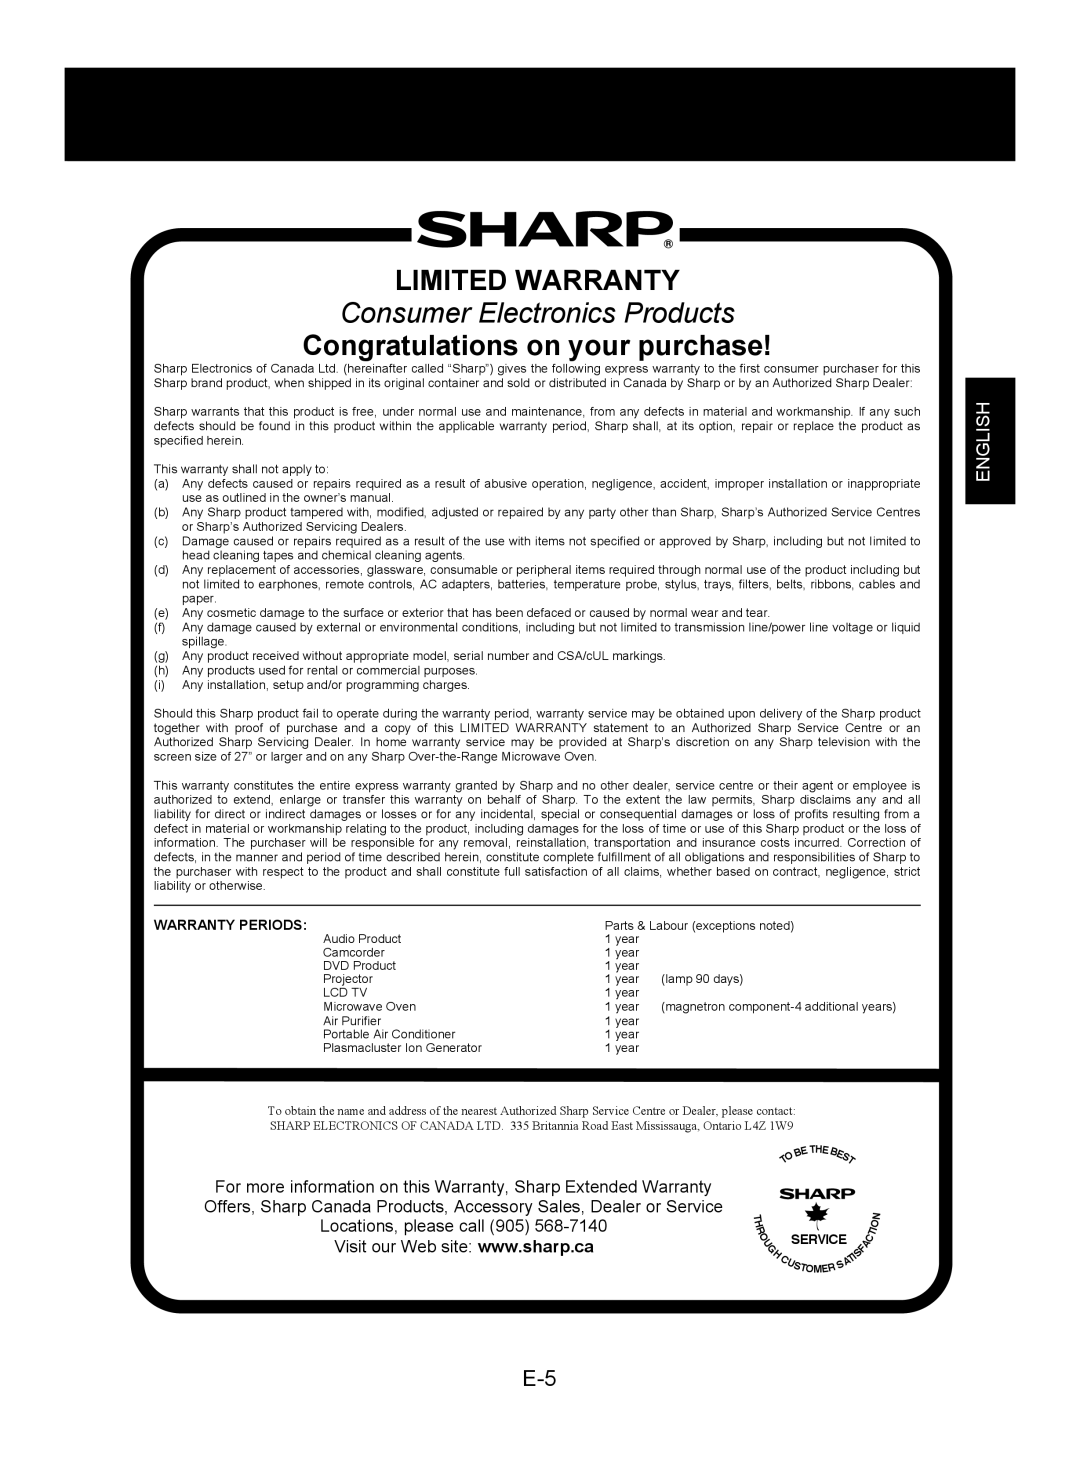 Sharp FP-P30U Limited Warranty, Consumer Electronics Products, Congratulations on your purchase, English, Warranty Periods 